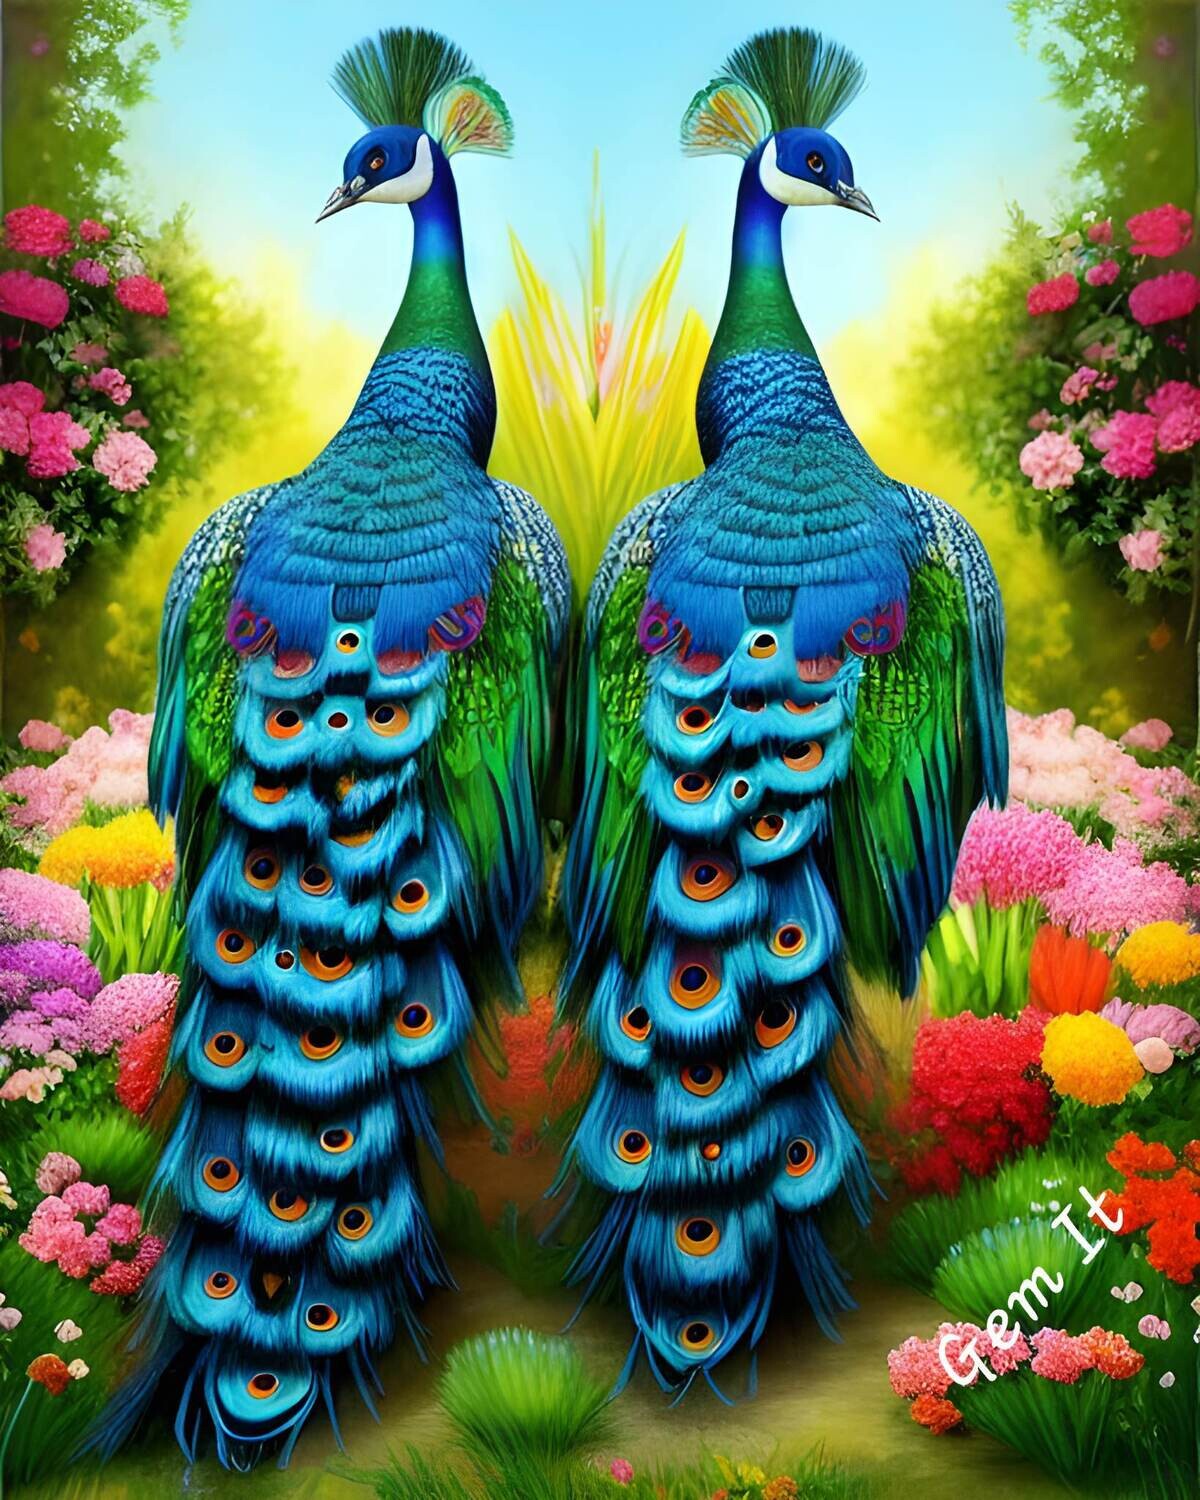 Pair of Peacocks 253 - Specially ordered for you. Delivery is approximately 4 - 6 weeks.